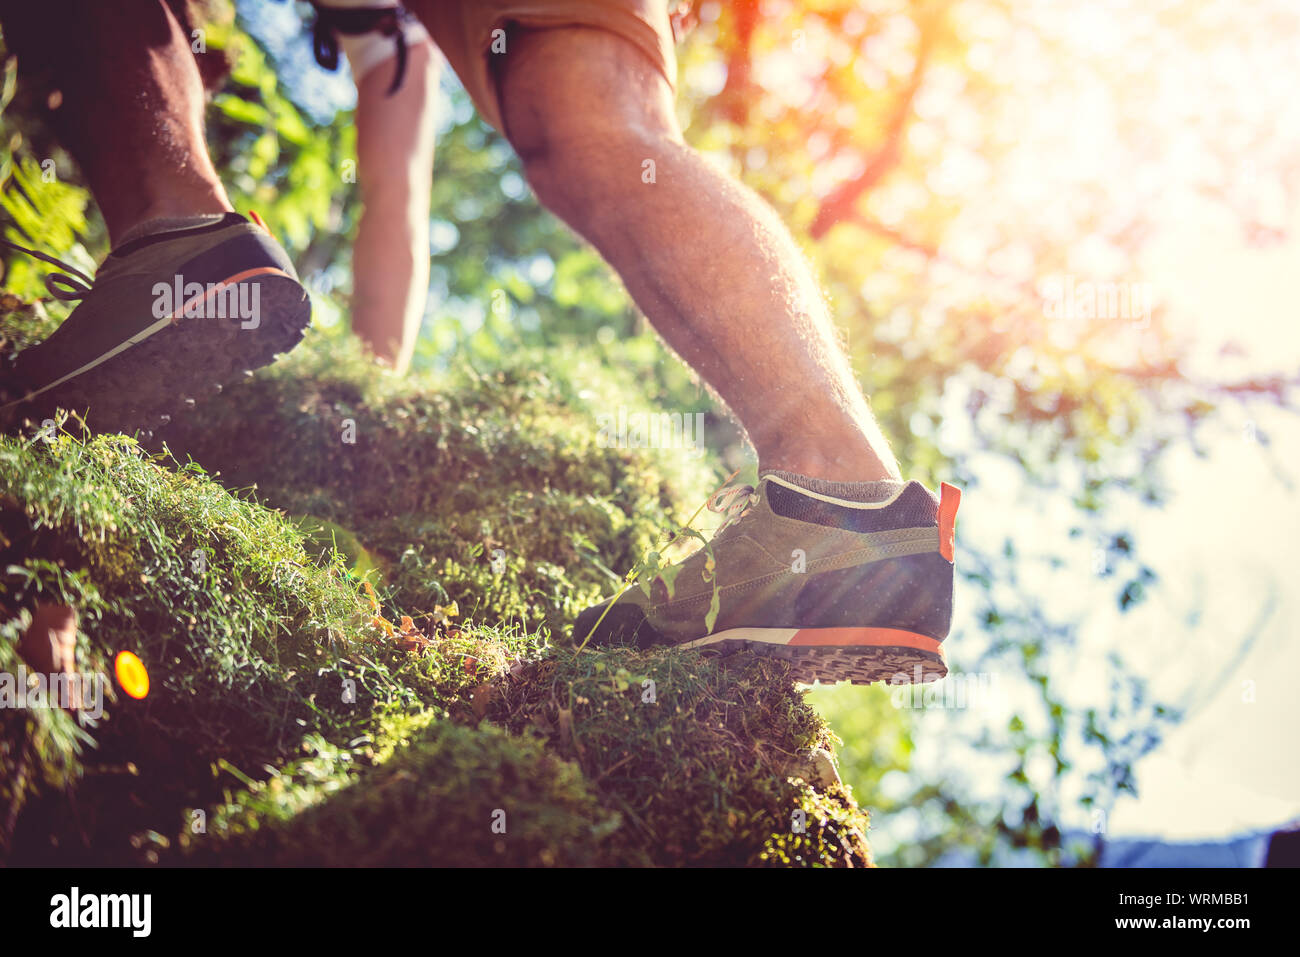 Hikers climbing on a moss-covered boulders Stock Photo